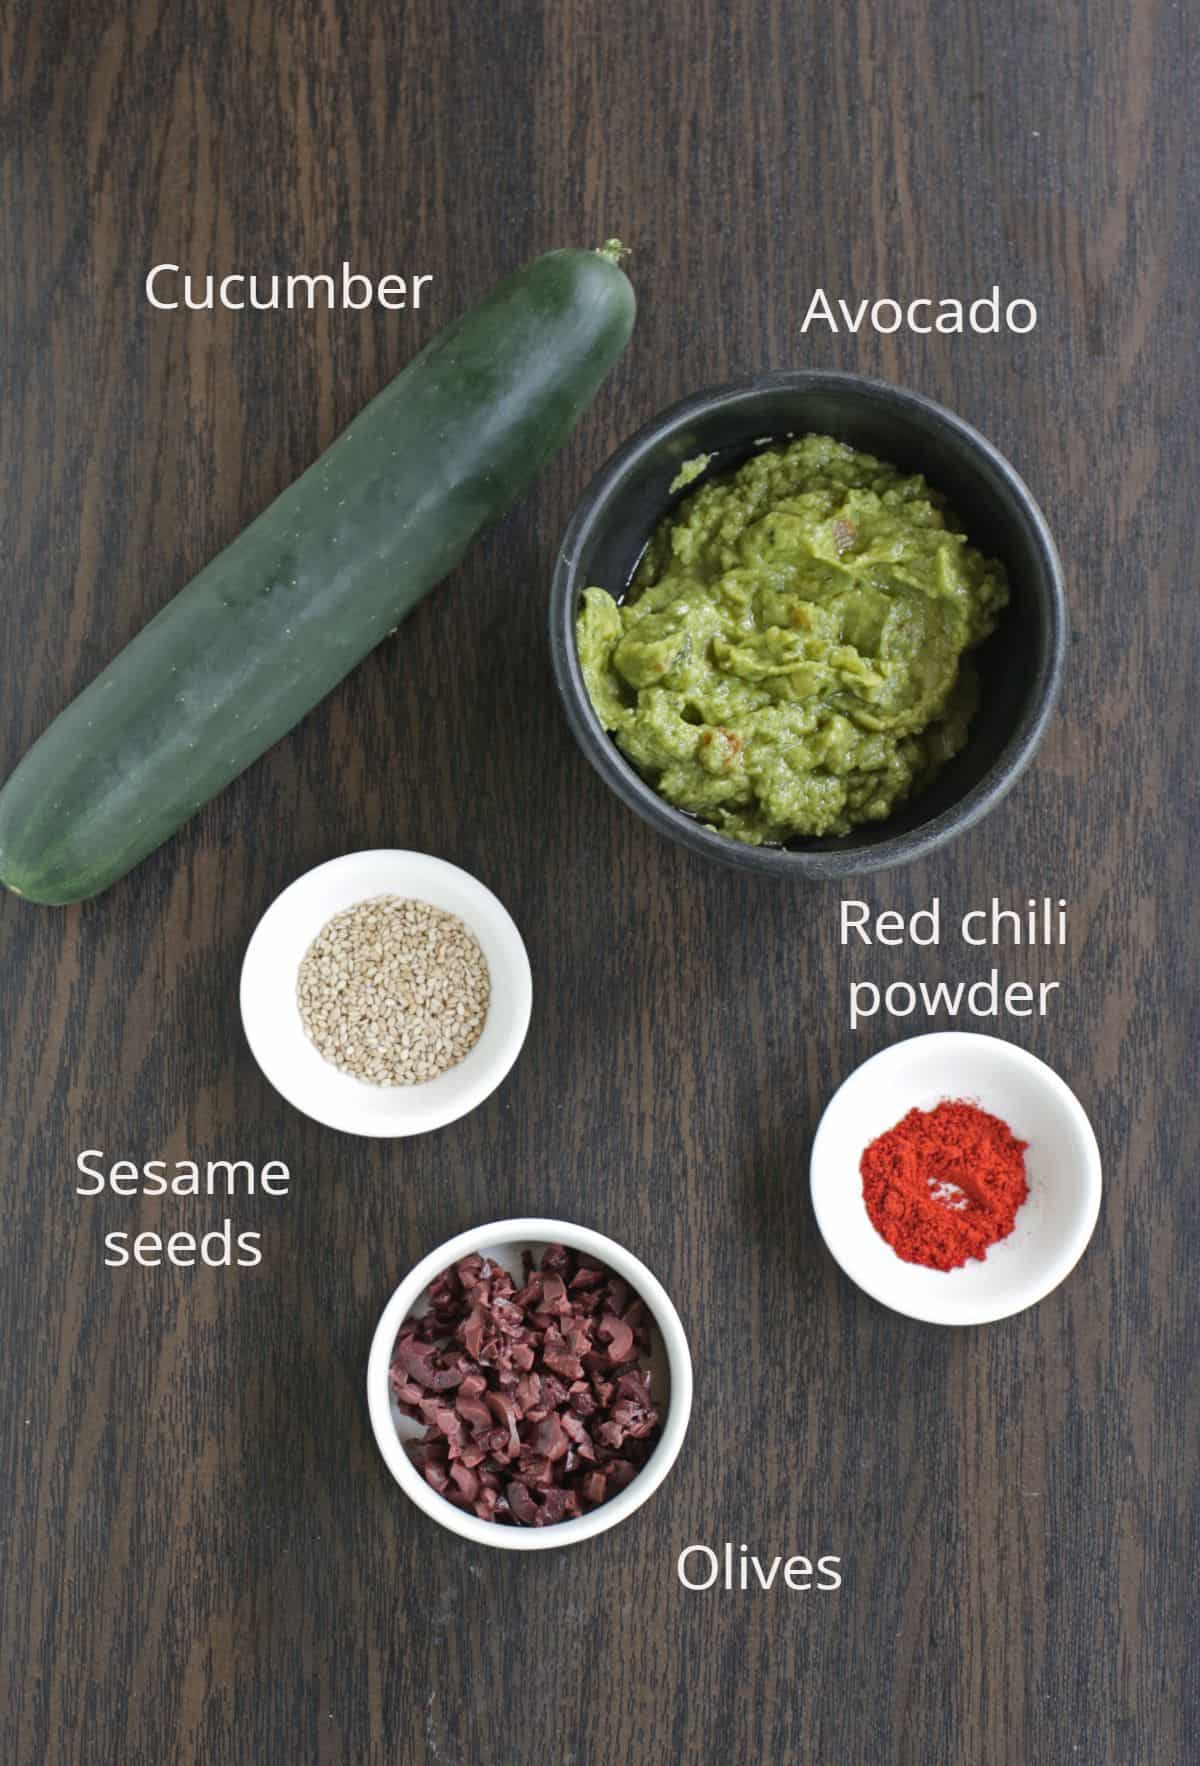 Ingredients labeled to make cucumber avocado rolls